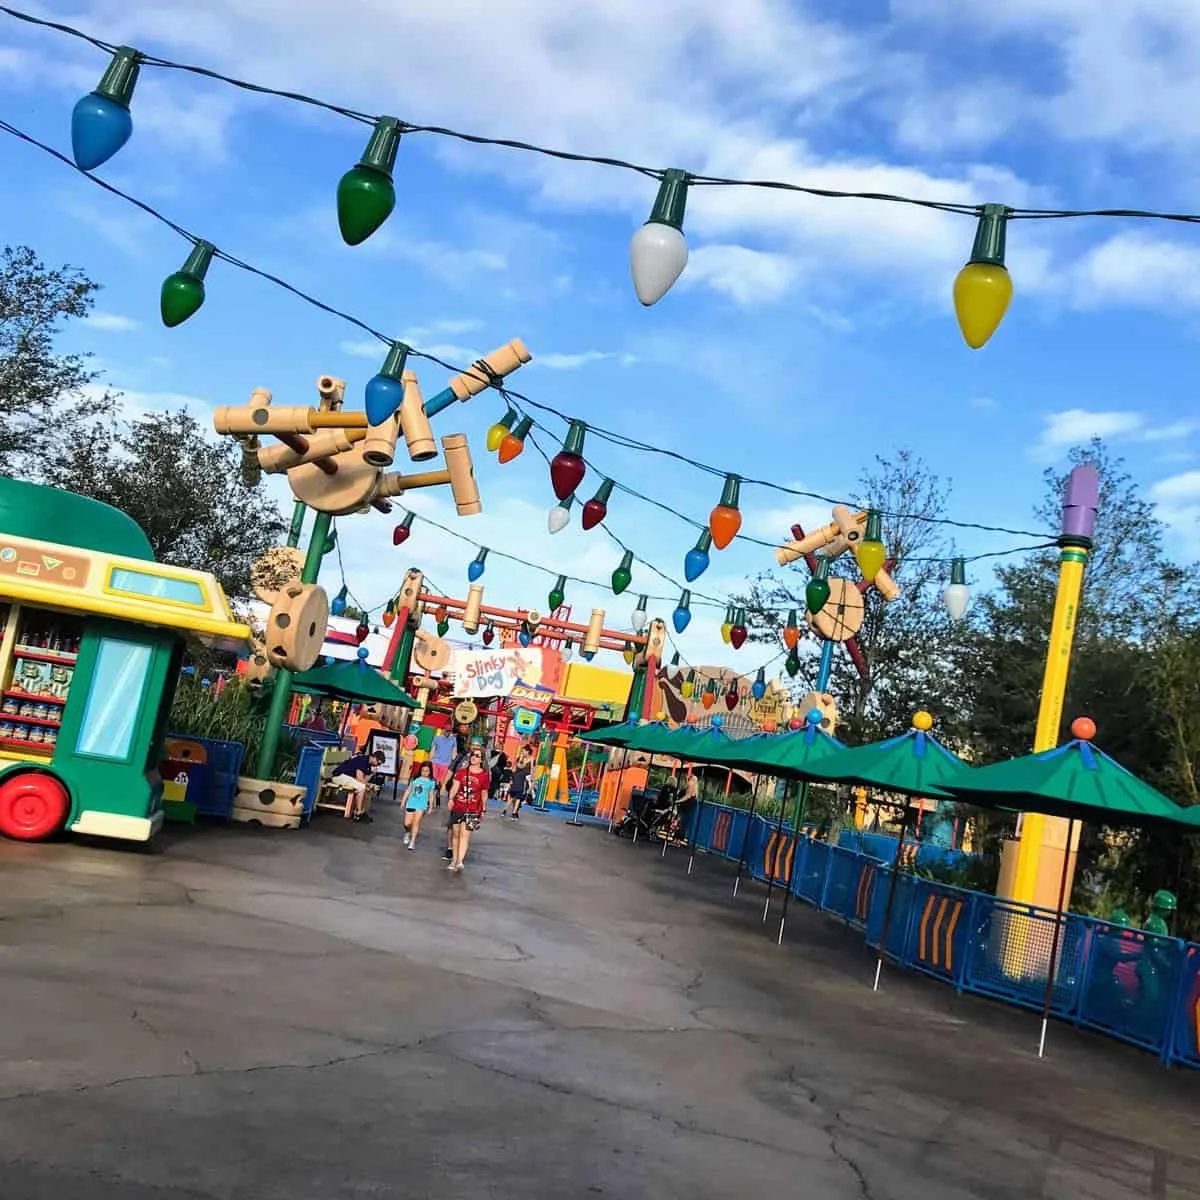 Guide to Early Morning Magic at Toy Story Land in Hollywood Studios